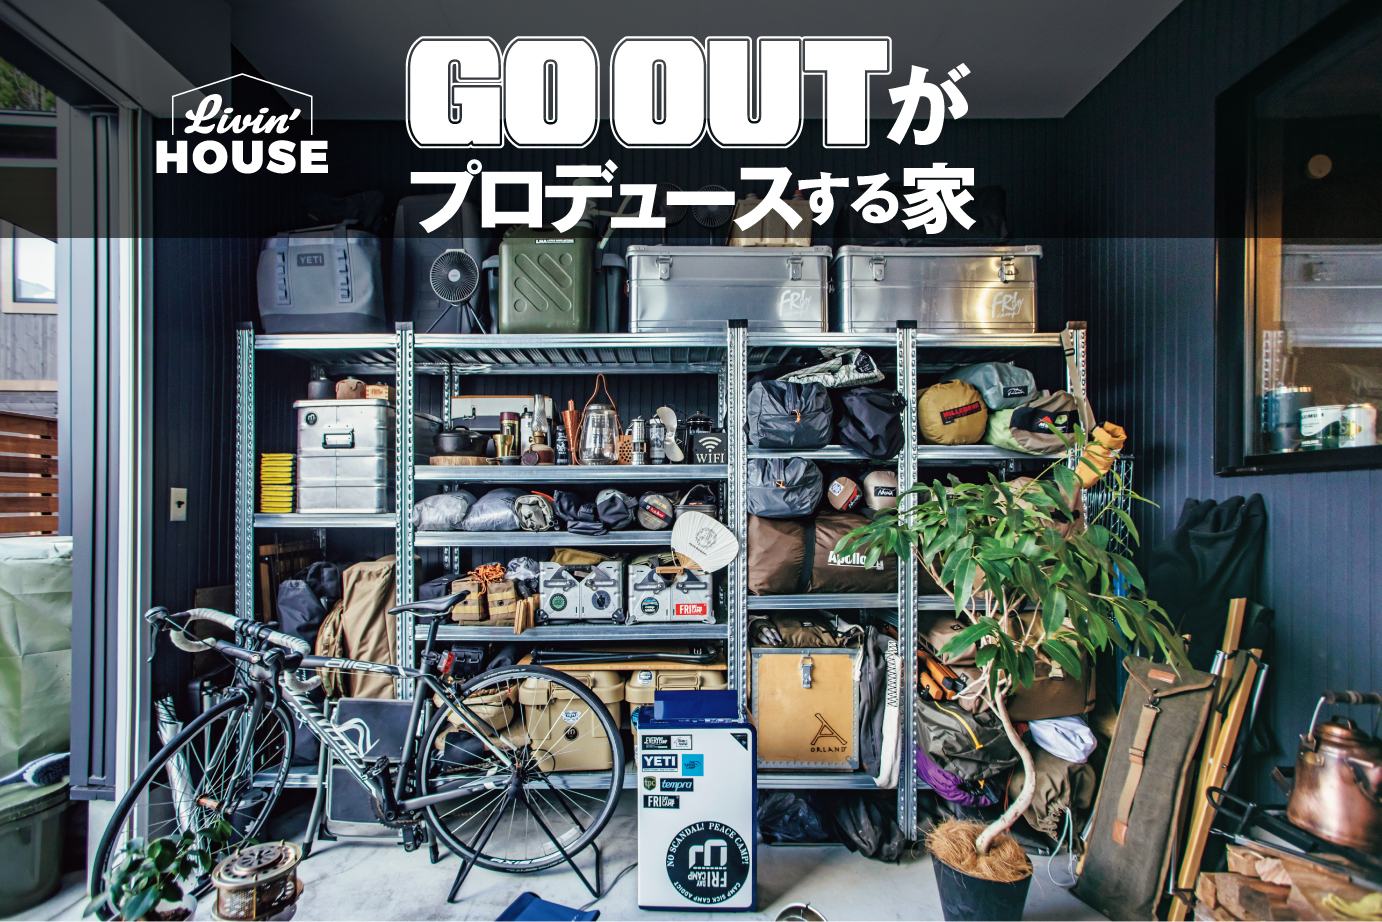 GO OUTがプロデュースする家「Livin’ HOUSE」取扱開始！！